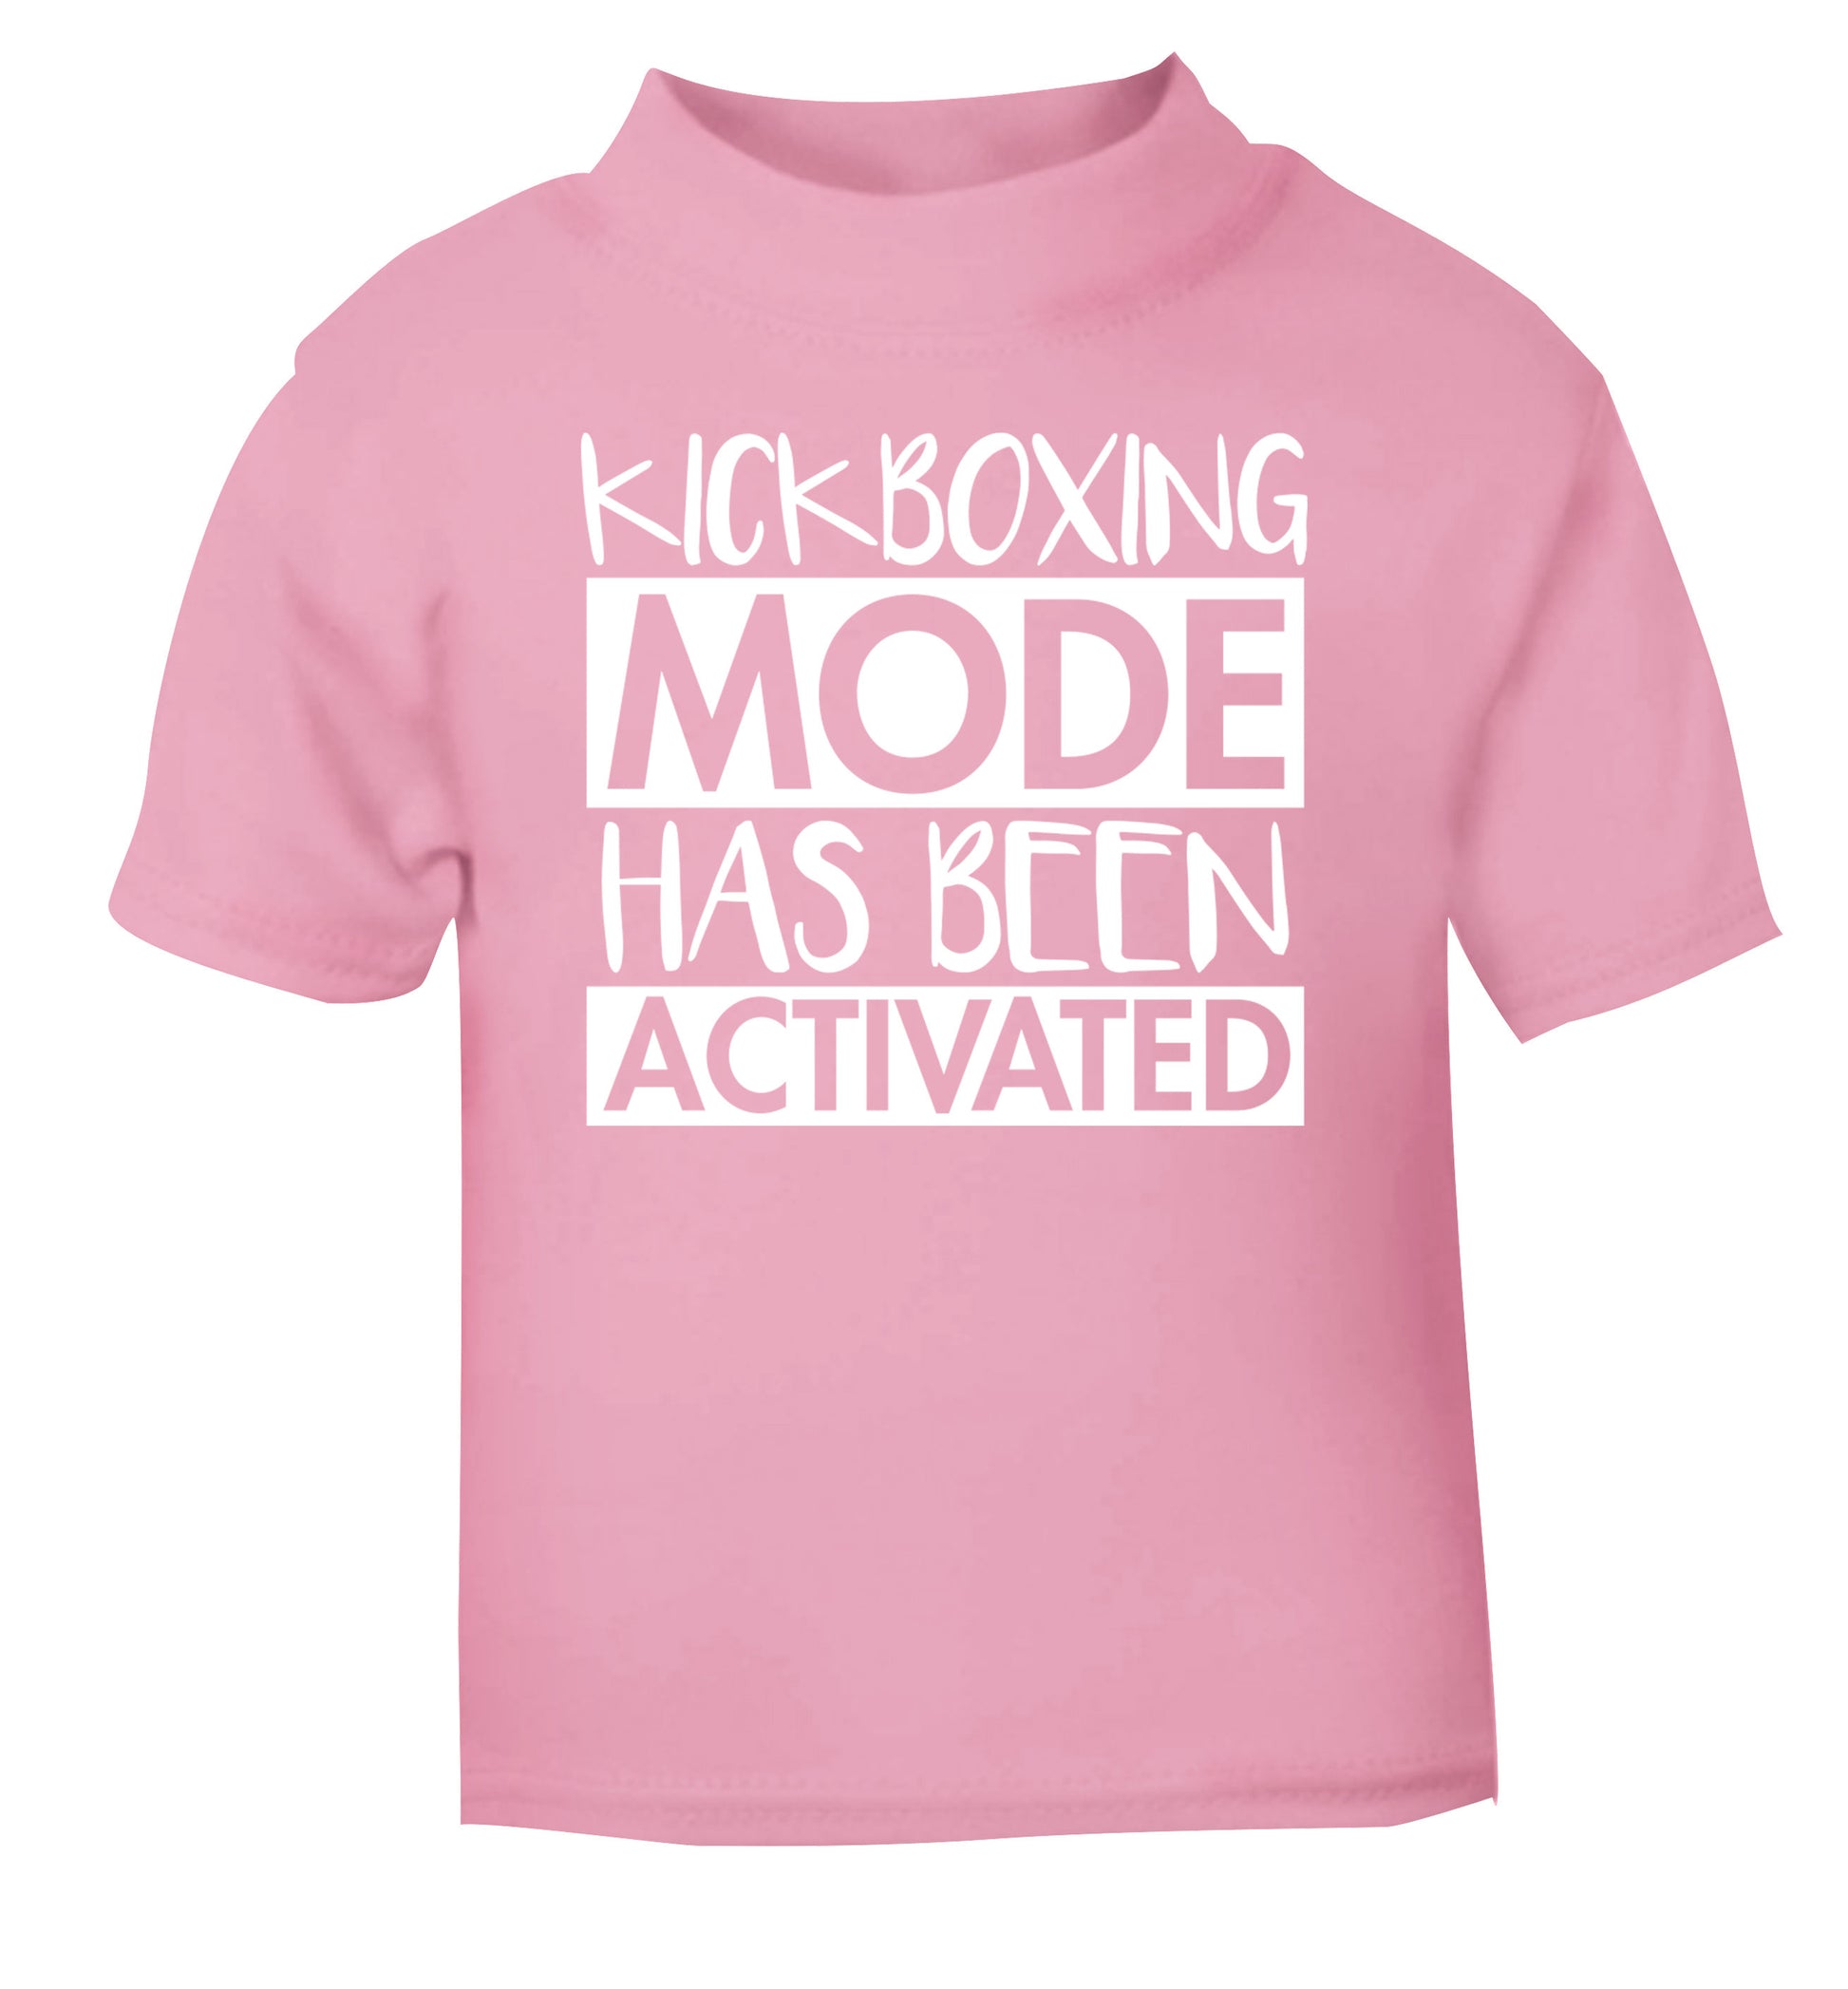 Kickboxing mode activated light pink Baby Toddler Tshirt 2 Years